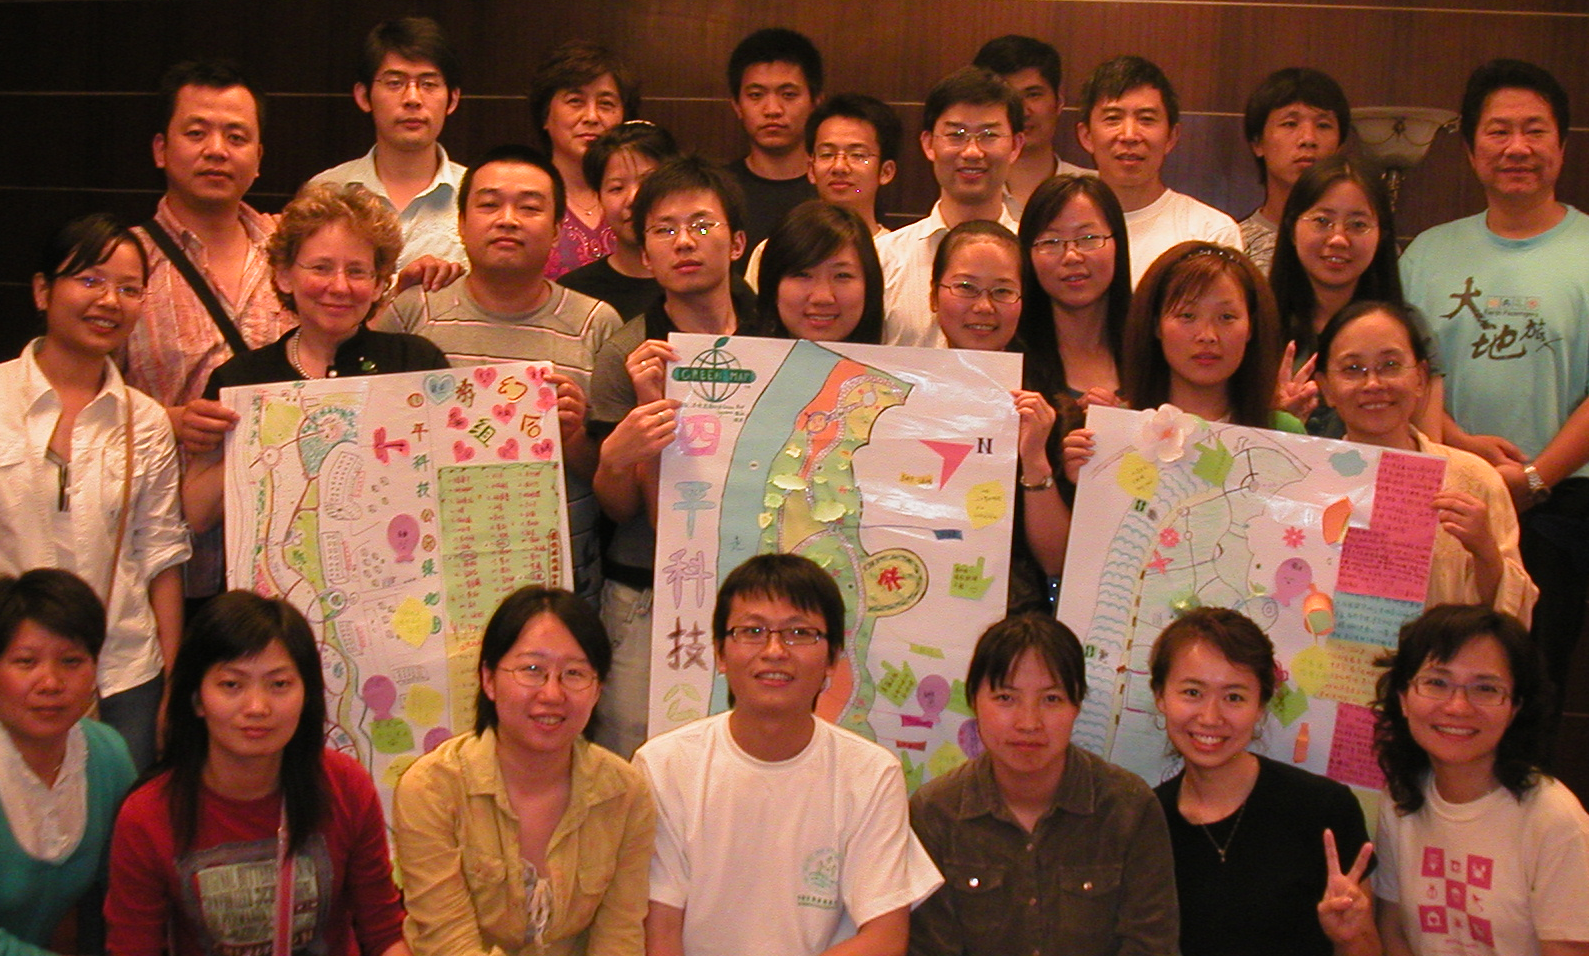 Meeting Chinese Green Mapmakers in Shanghai was very meaningful to Wendy